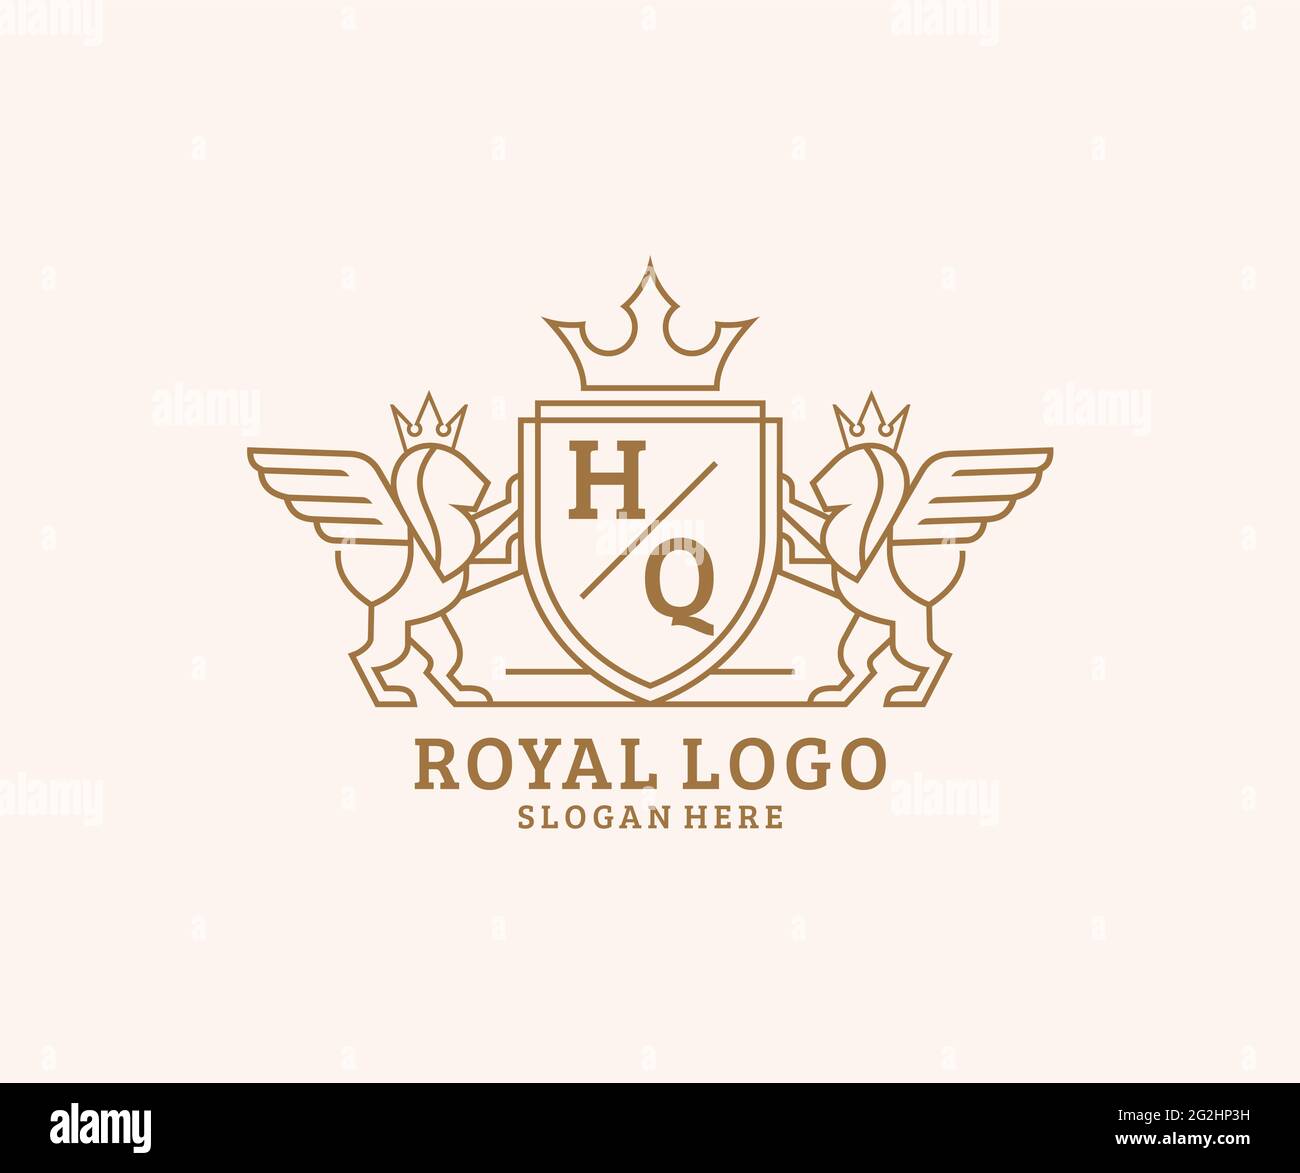 HQ Letter Lion Royal Luxury Heraldic,Crest Logo template in vector art for Restaurant, Royalty, Boutique, Cafe, Hotel, Heraldic, Jewelry, Fashion and Stock Vector